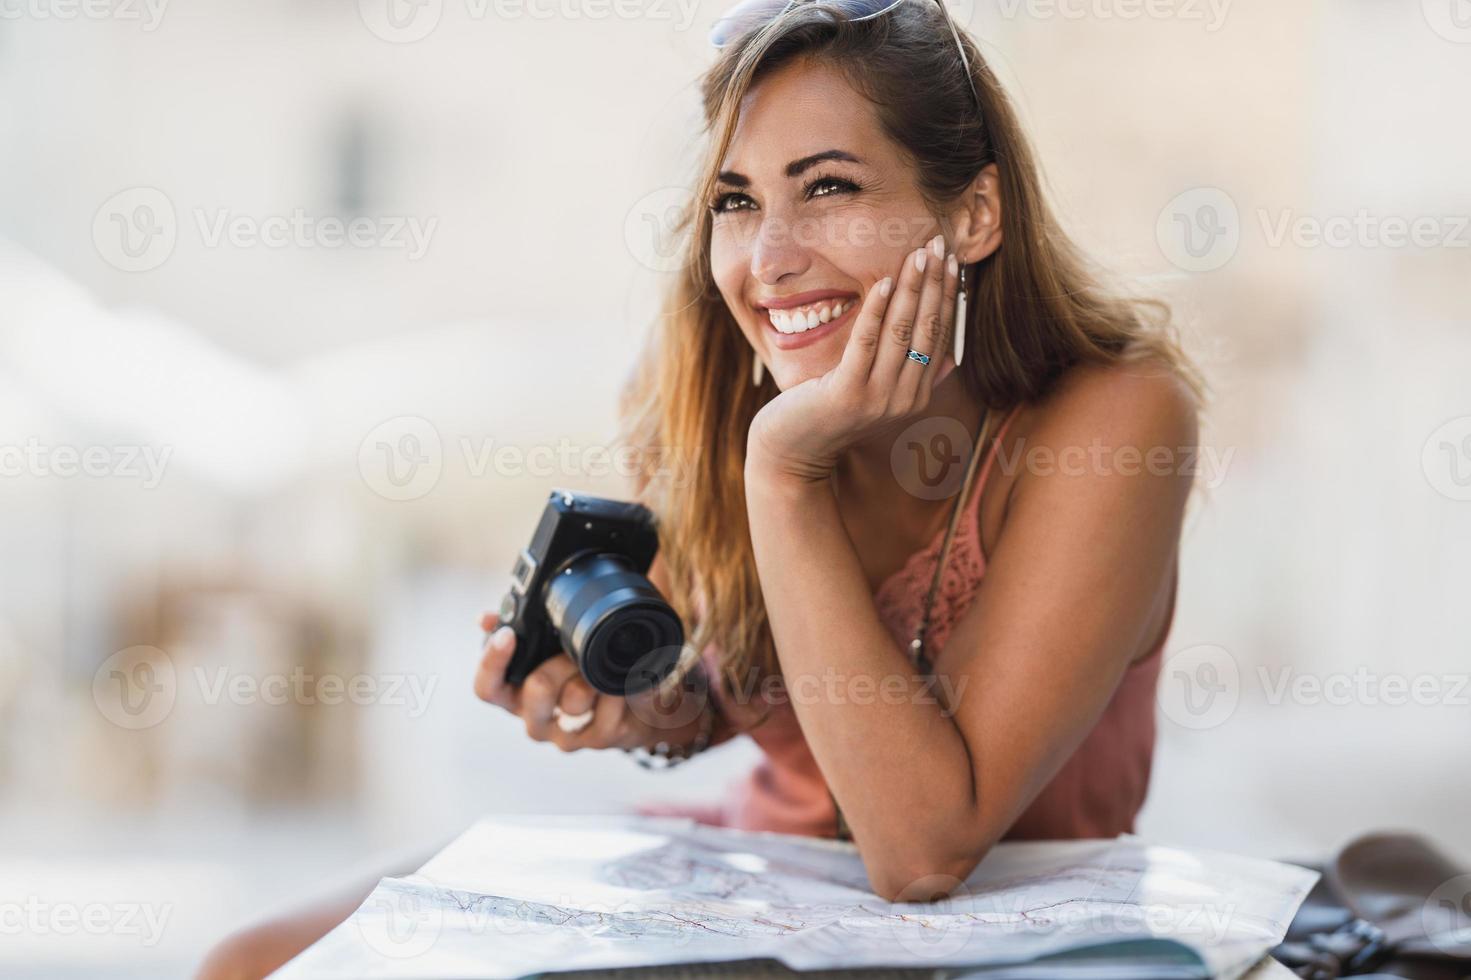 Woman with camera photo